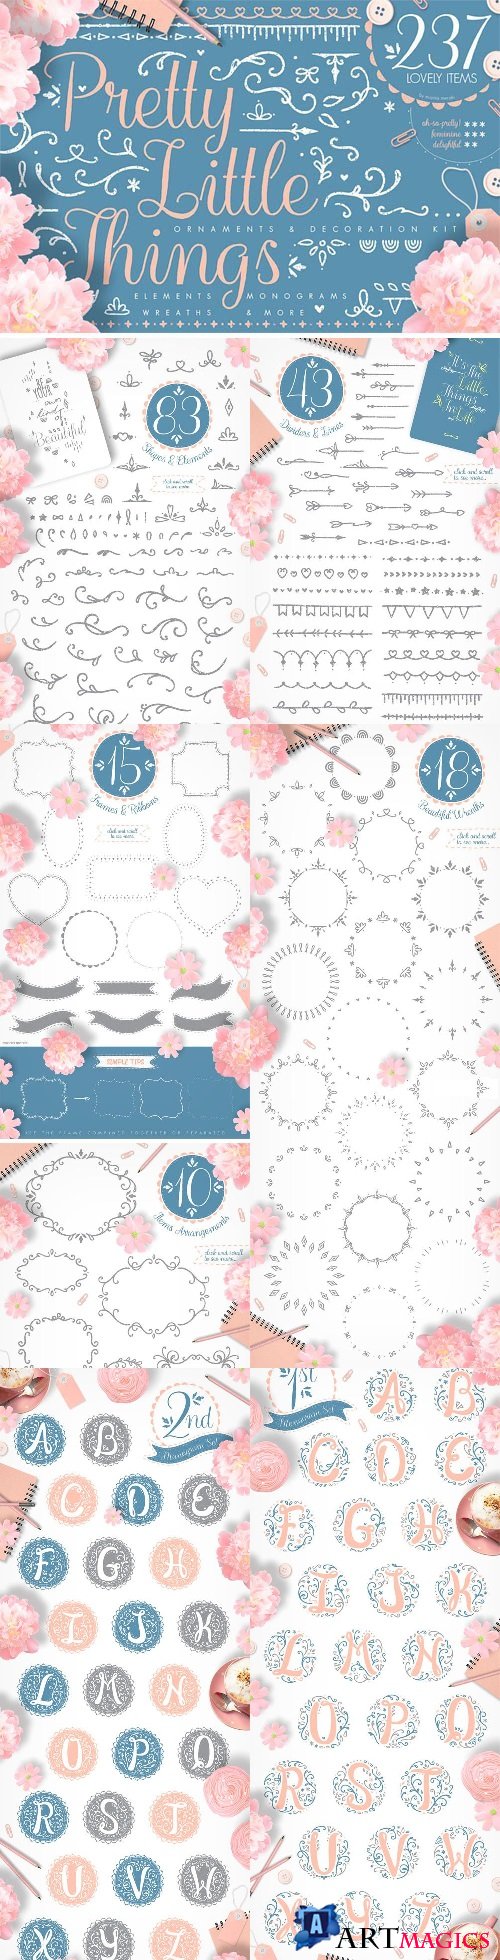 Pretty Little Things - Decoration Kit 1929935